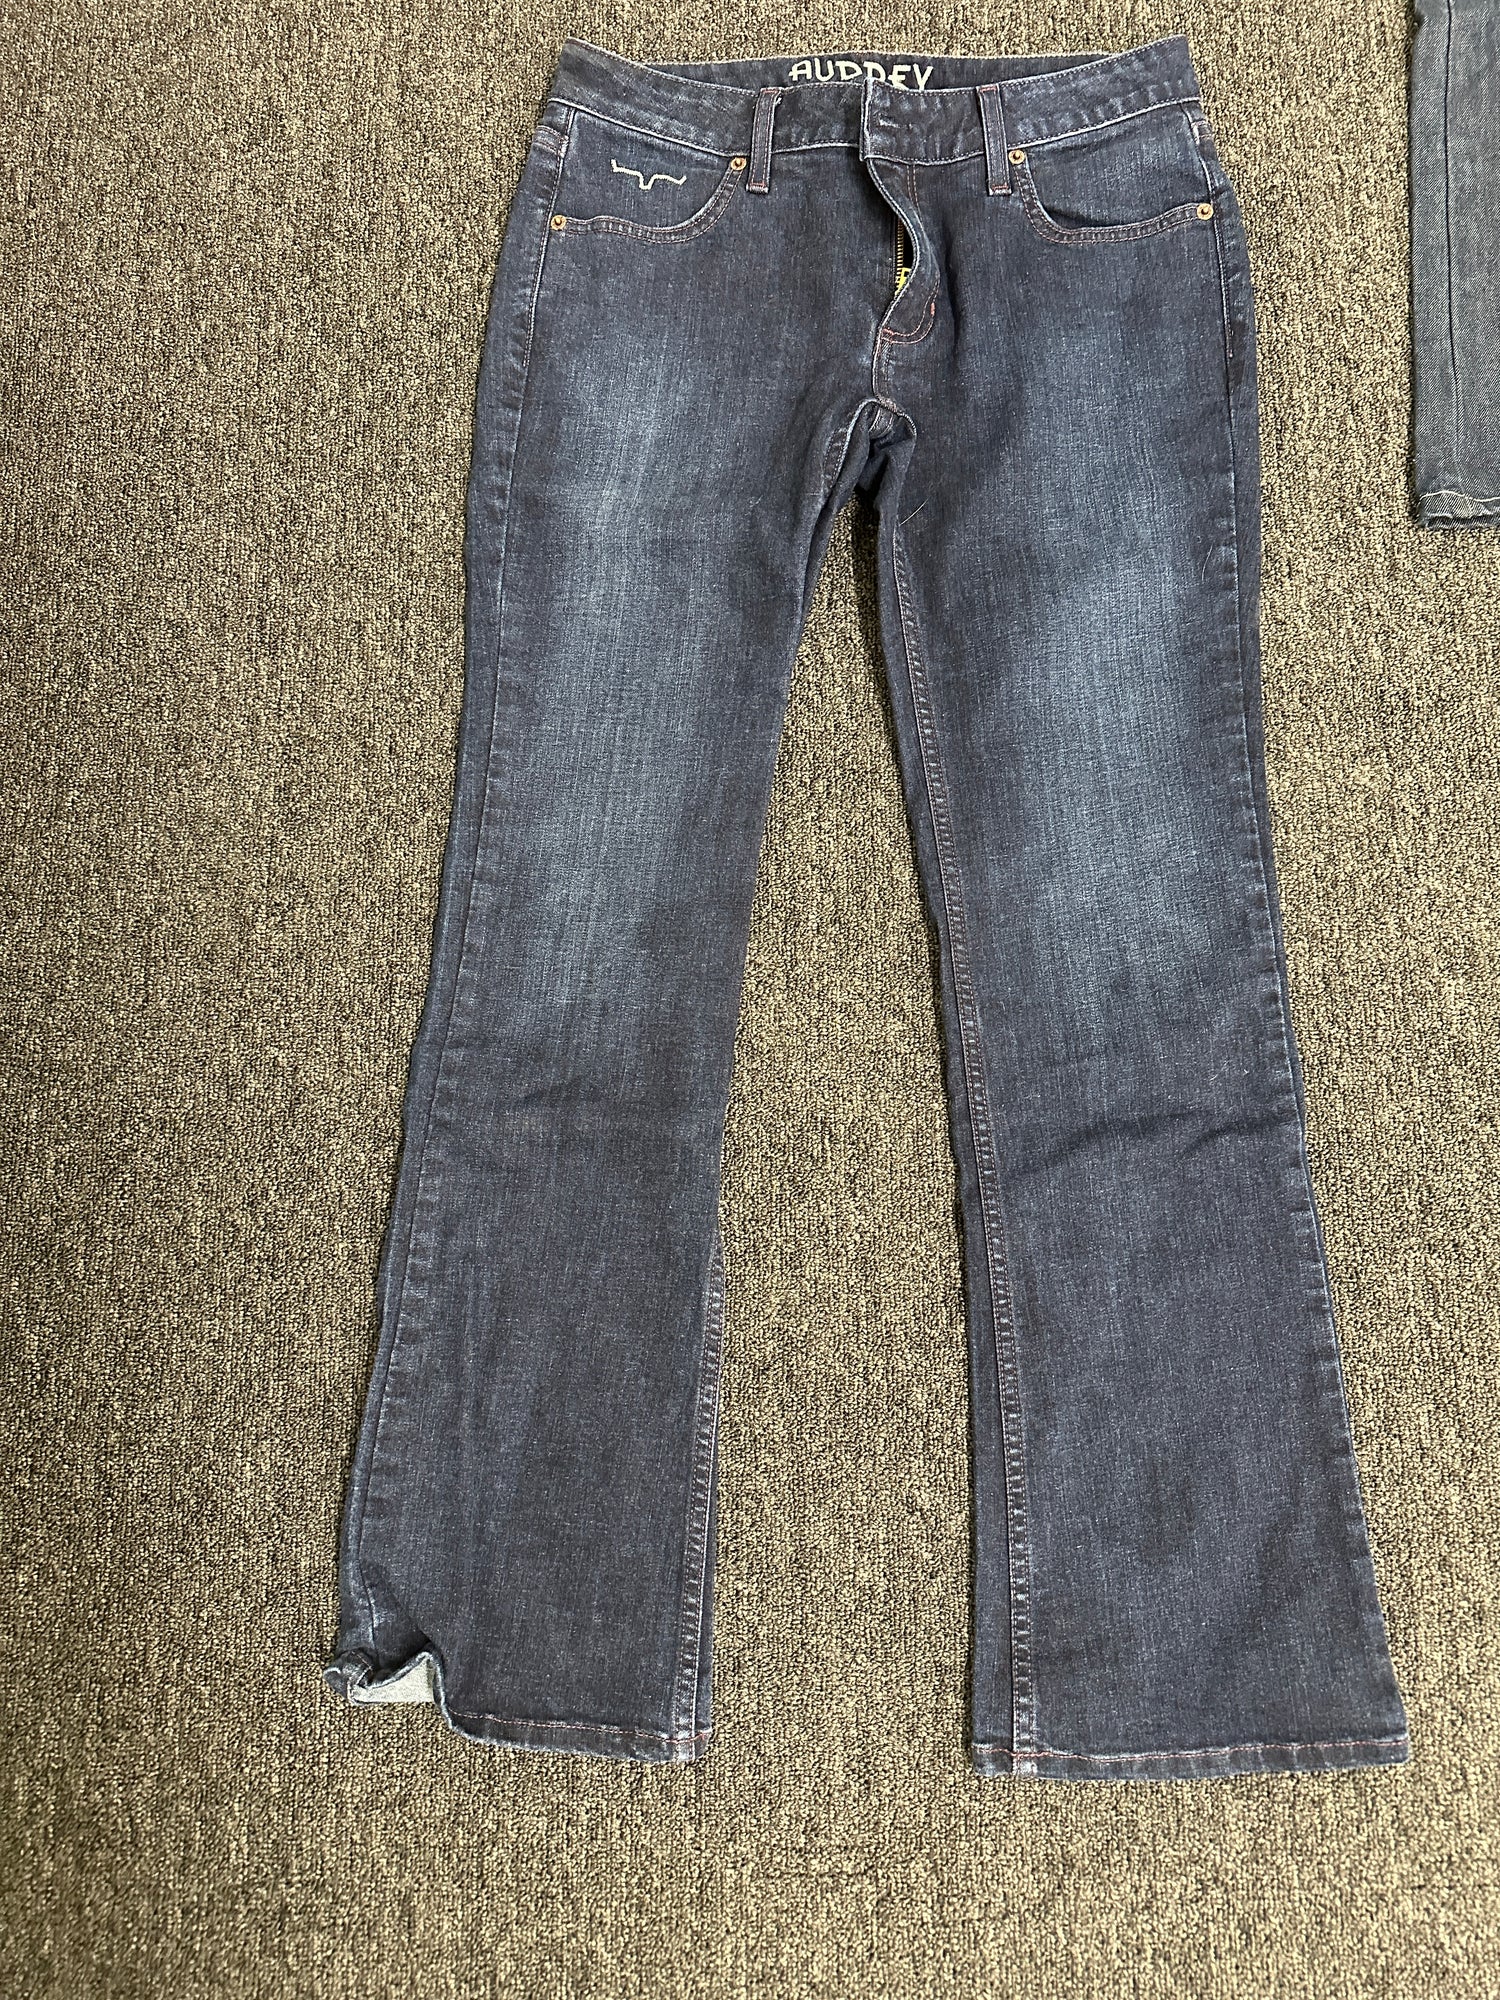 Women's Jeans - Kimes Audrey size 8/30 used in good condition